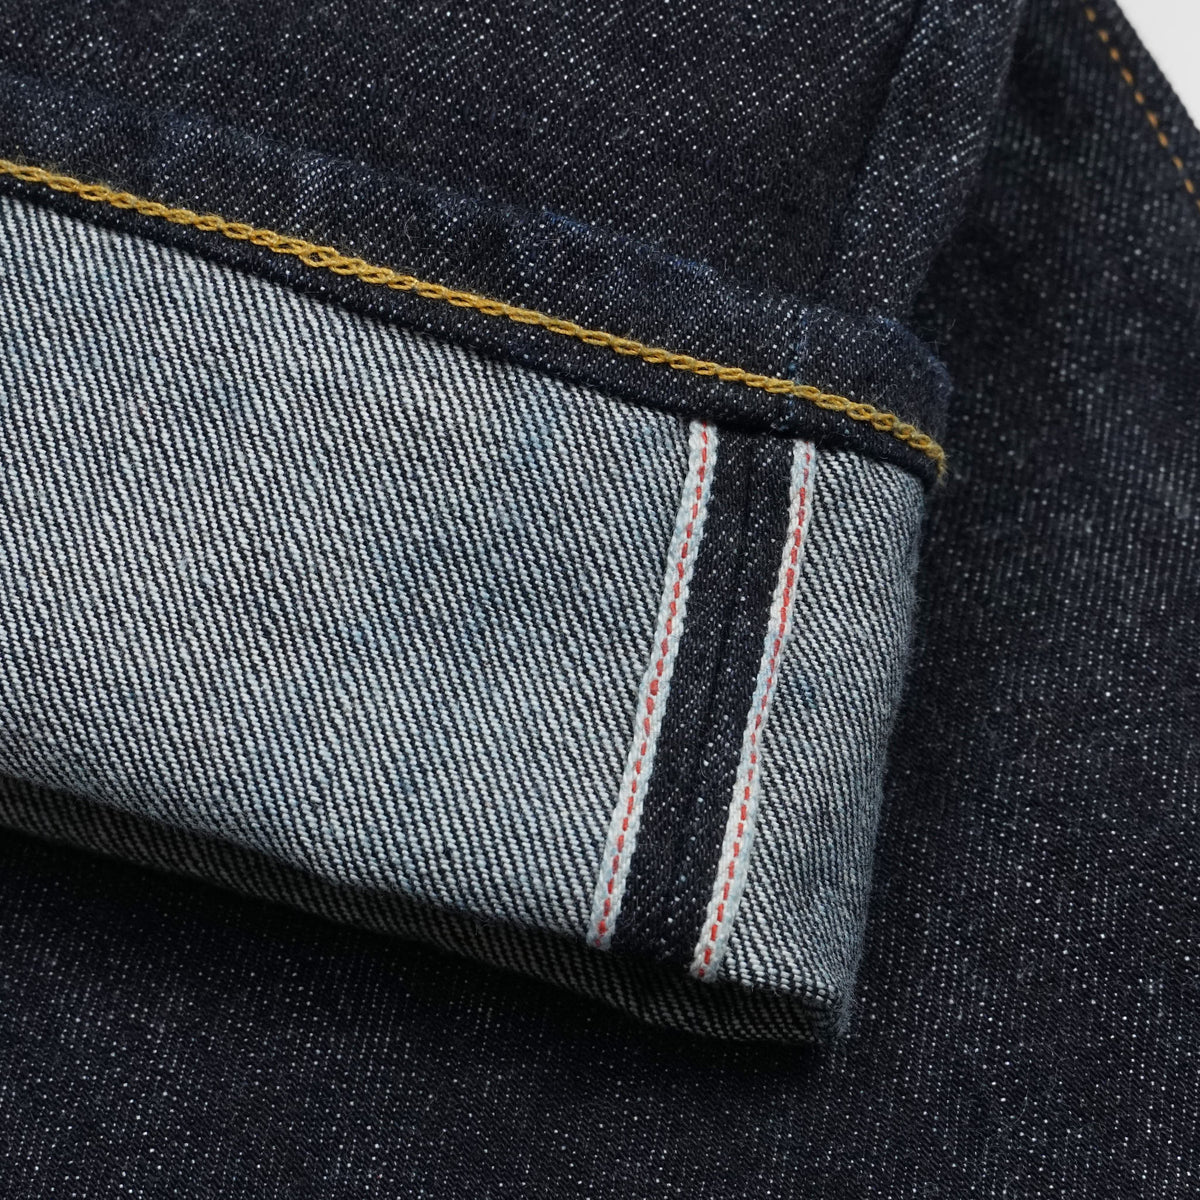 Double RL Low-Straight Selvage Denim Jeans